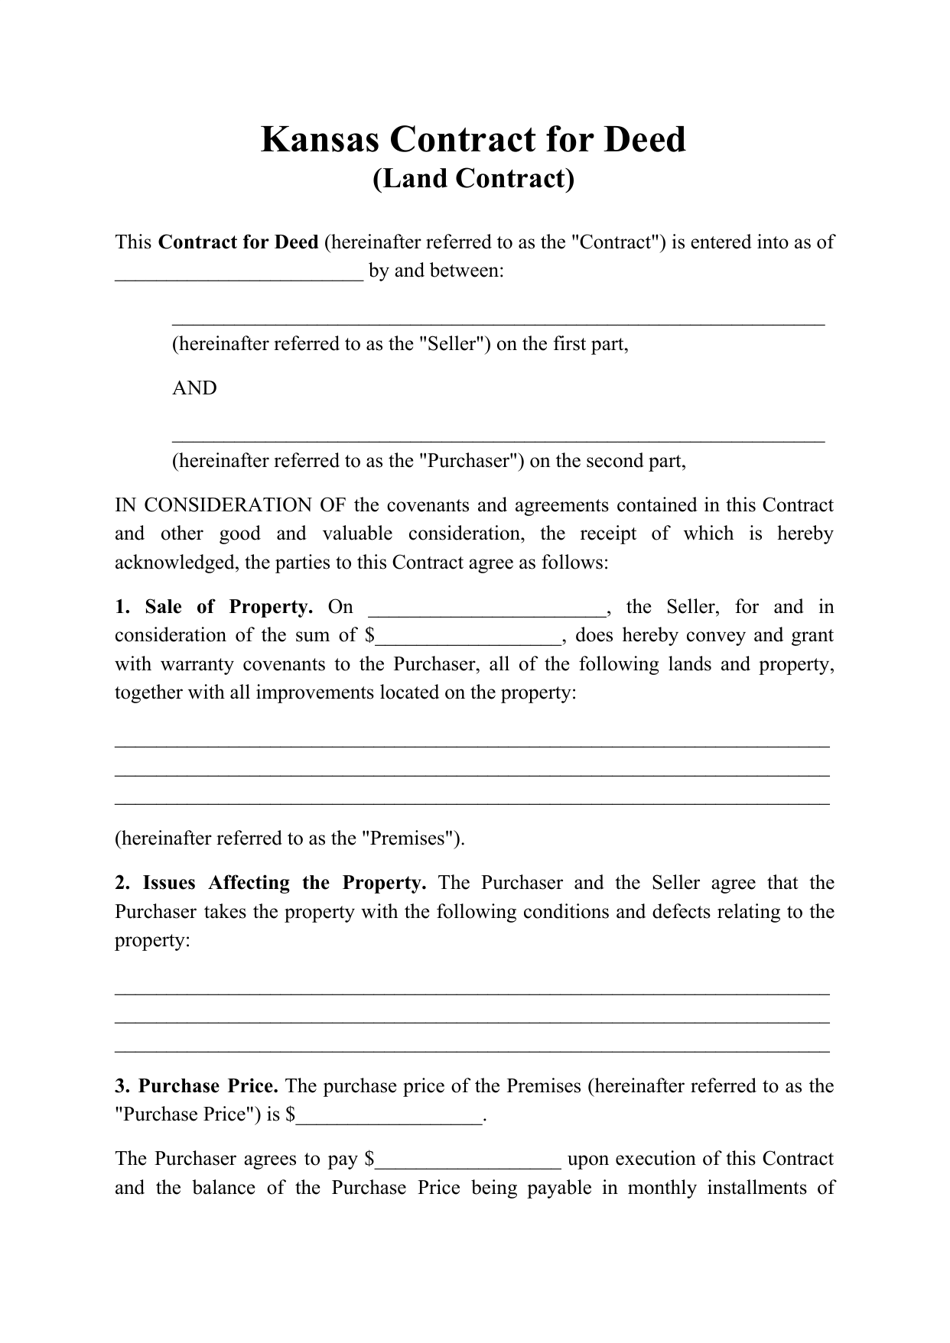 Contract for Deed (Land Contract) - Kansas, Page 1